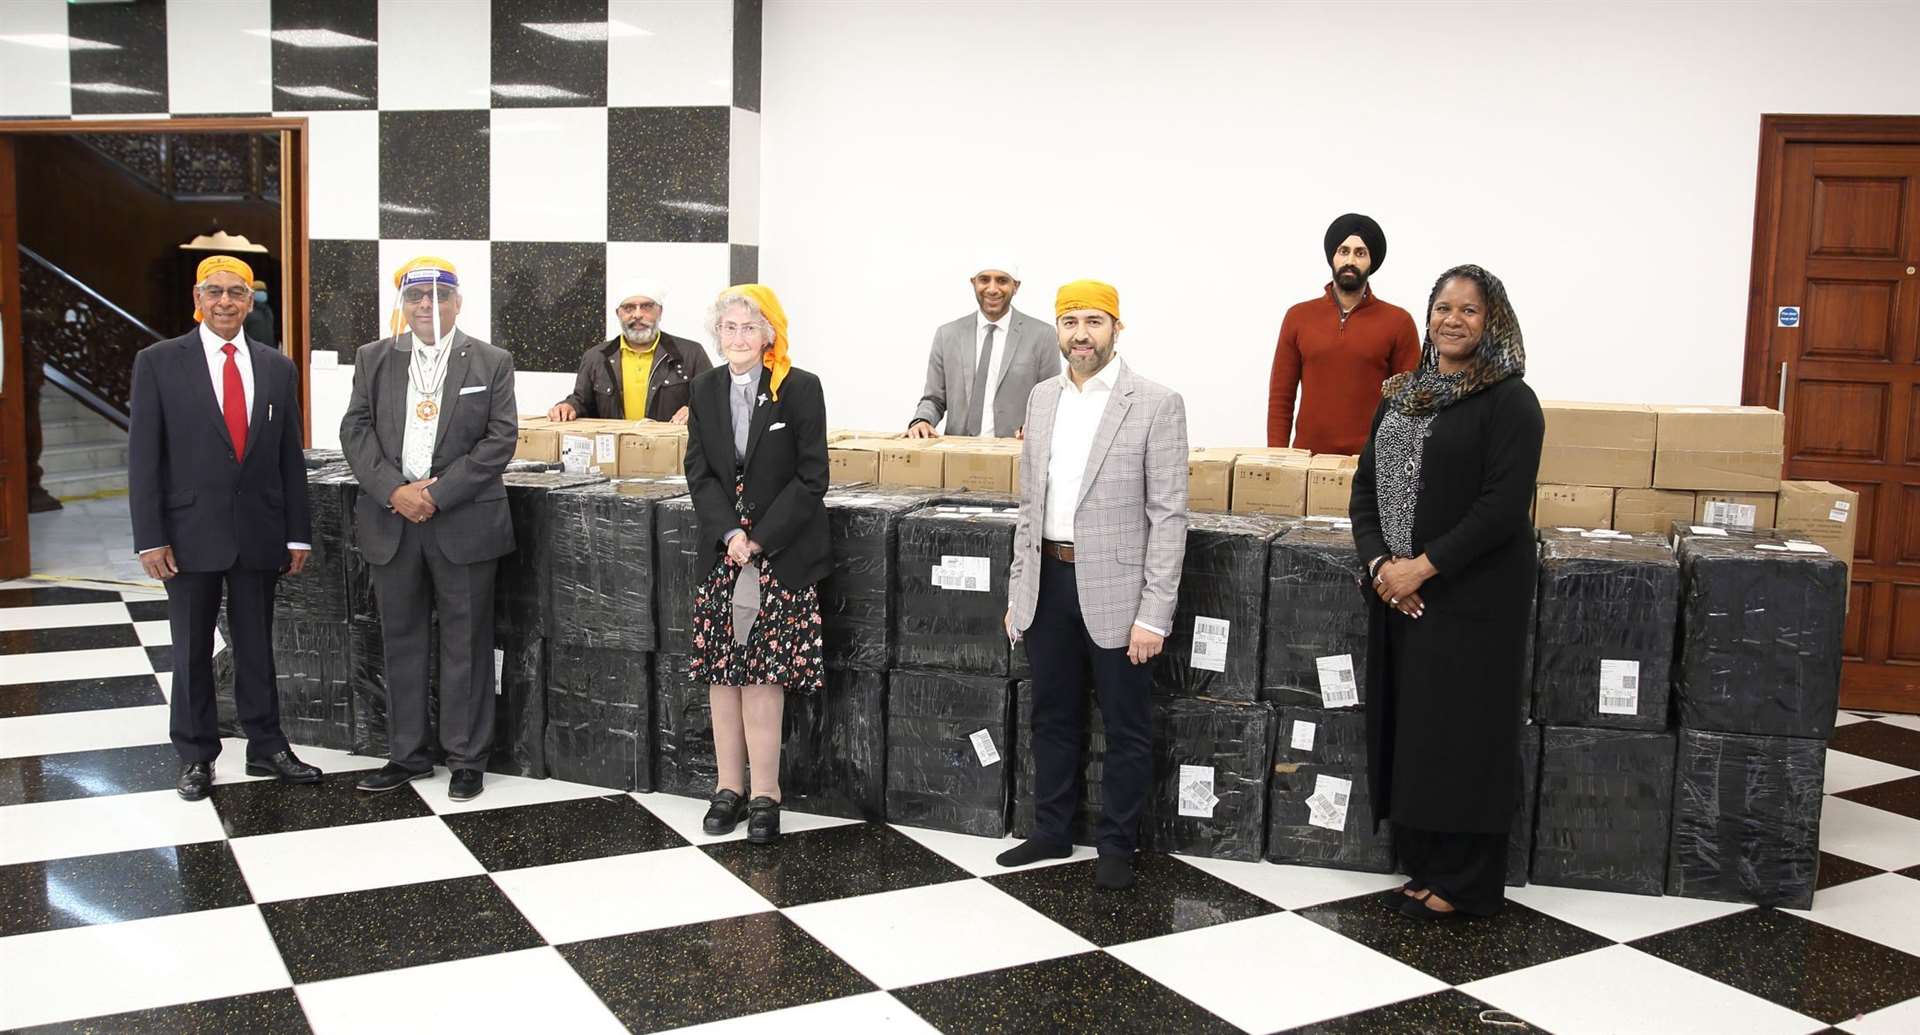 Some of the supporters of the campaign to send oxygen equipment to India at the Guru Nanak Darbar Gurdwara, Gravesend. Picture: Sarah Knight (47244732)